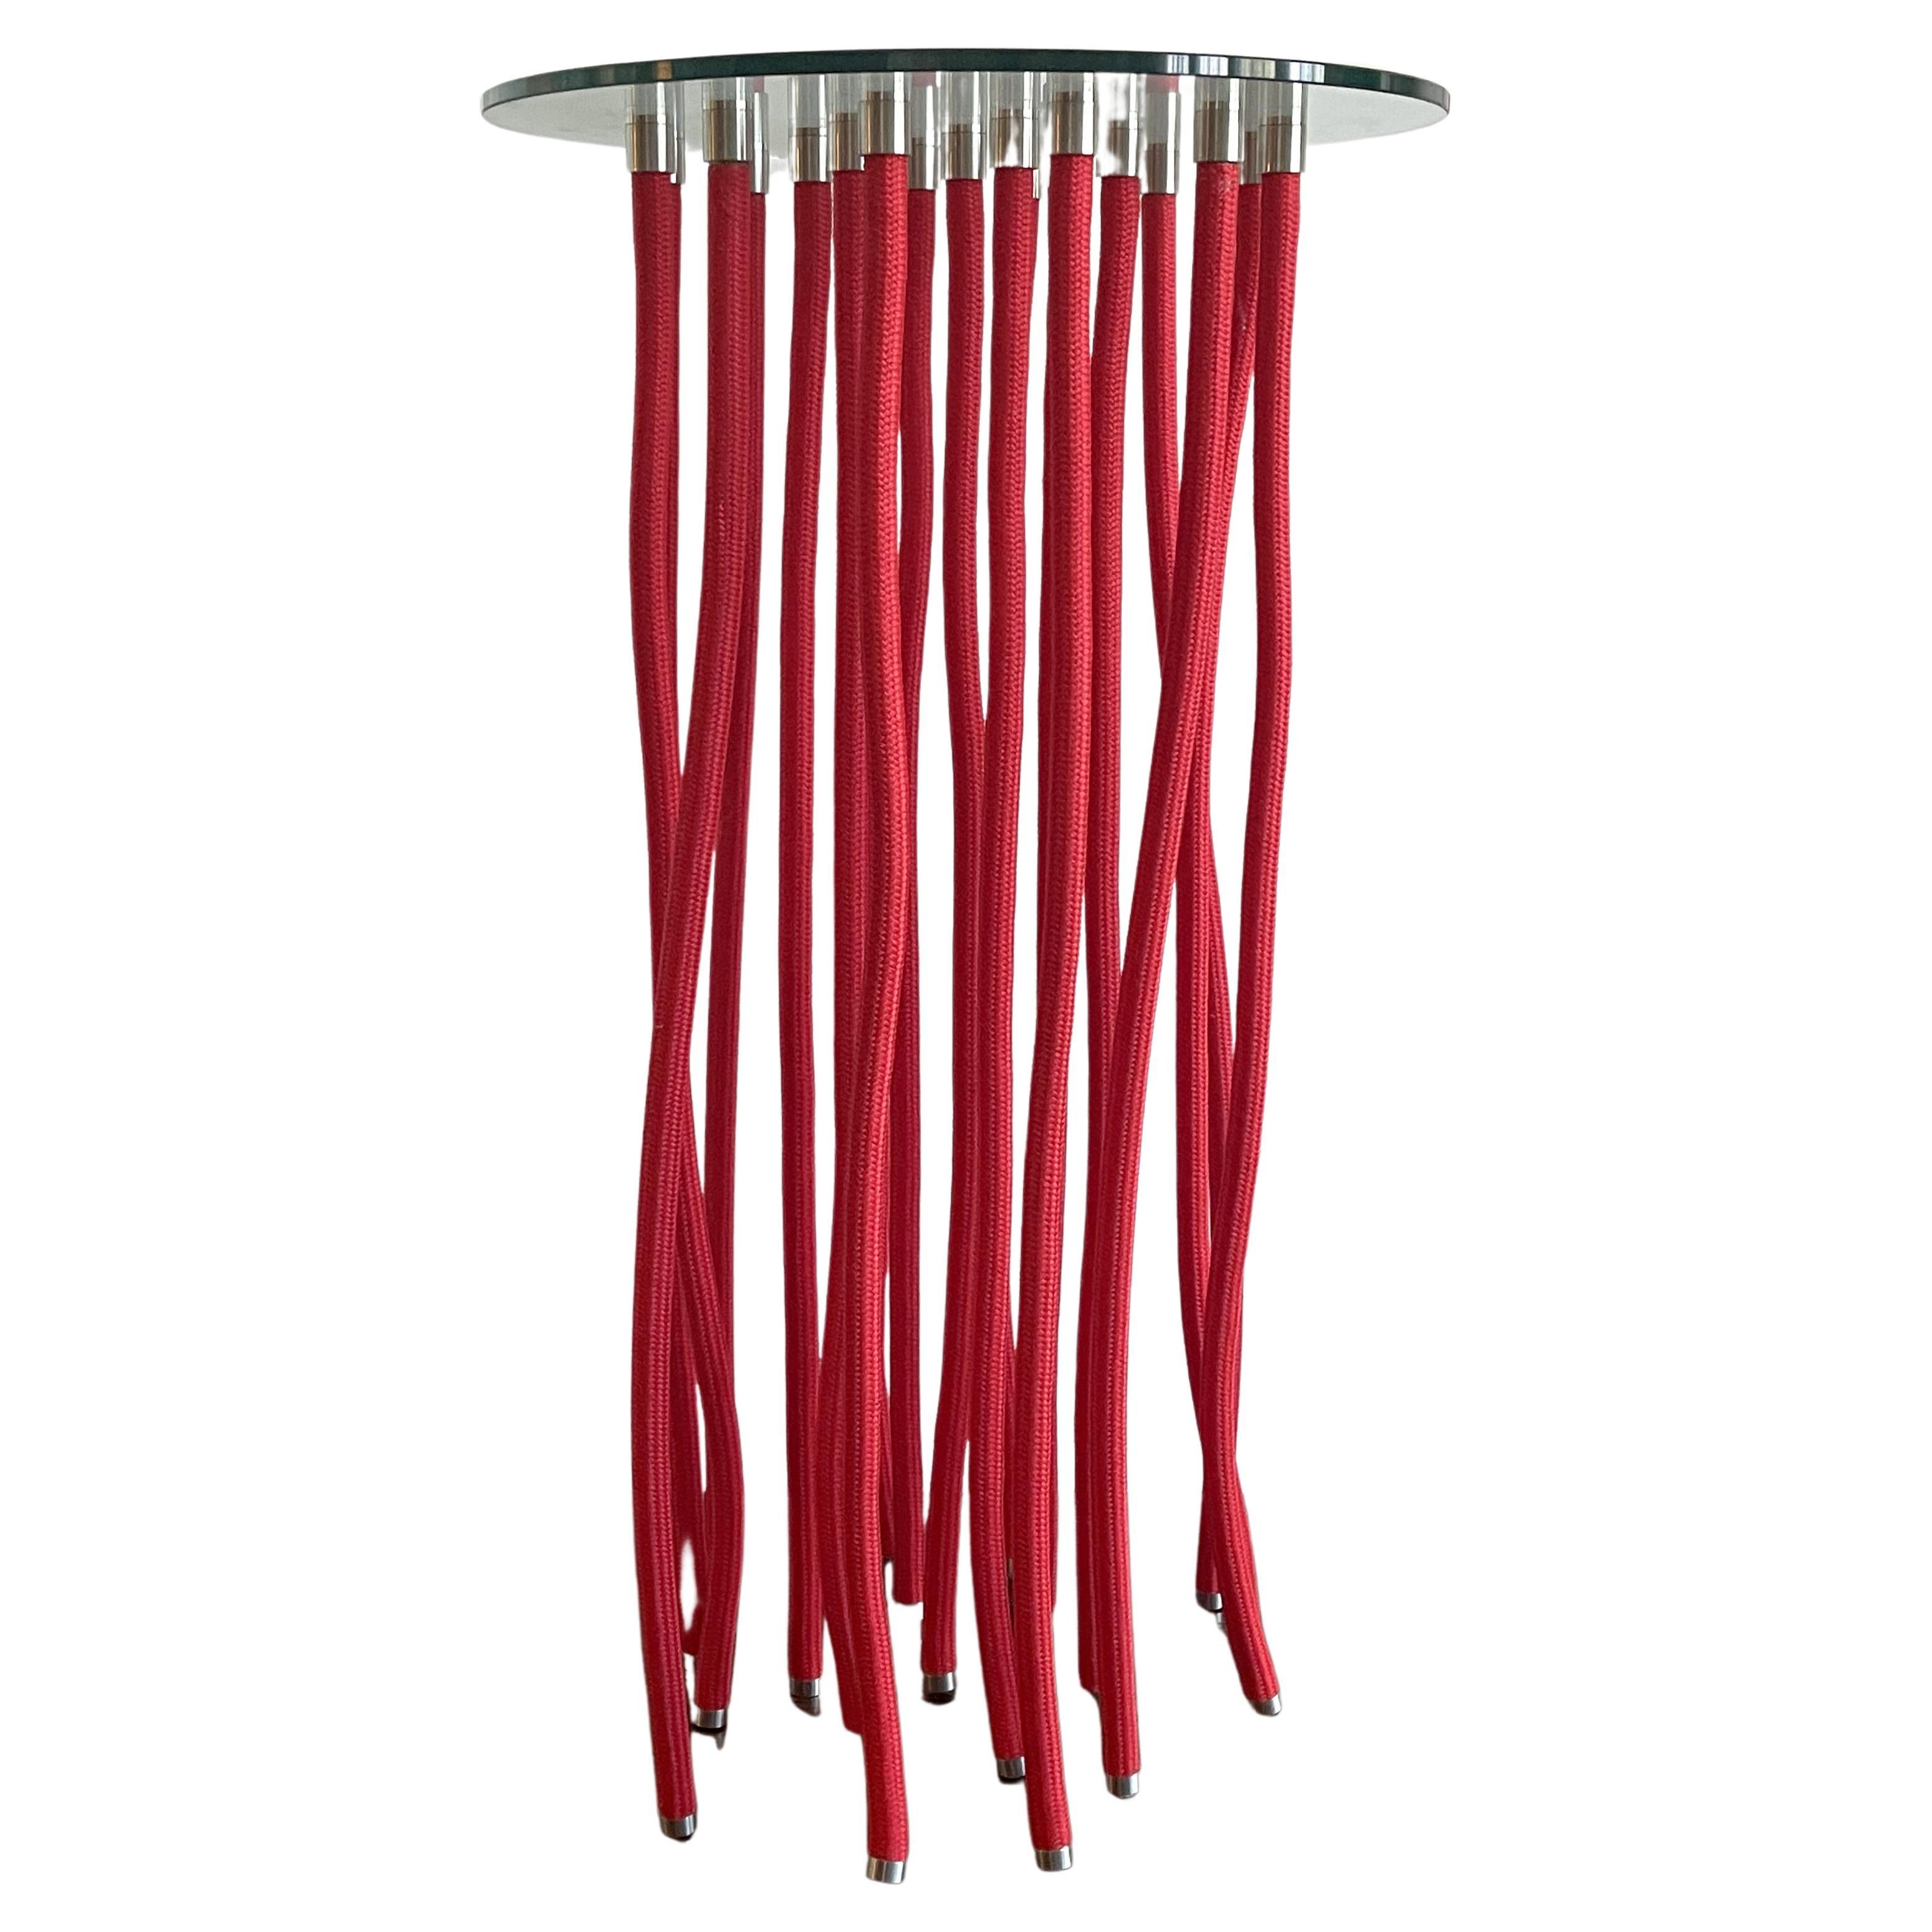 Tall ORG tables by Fabio Novembre for Cappellini For Sale